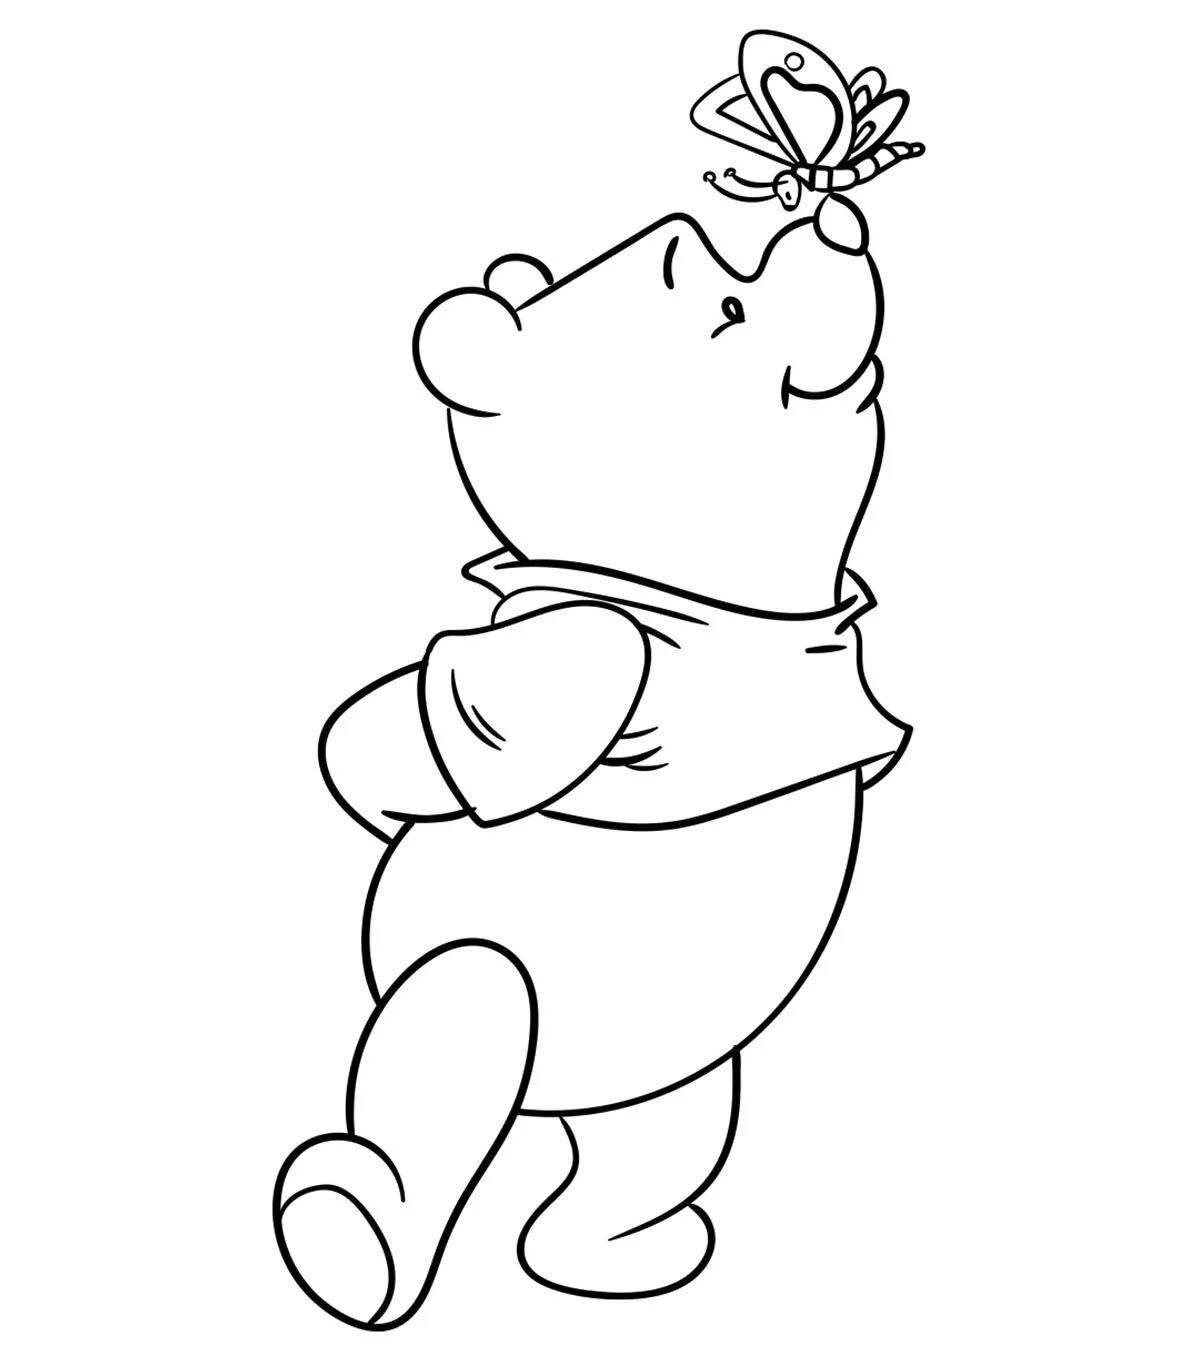 Coloring book smiling winnie the pooh